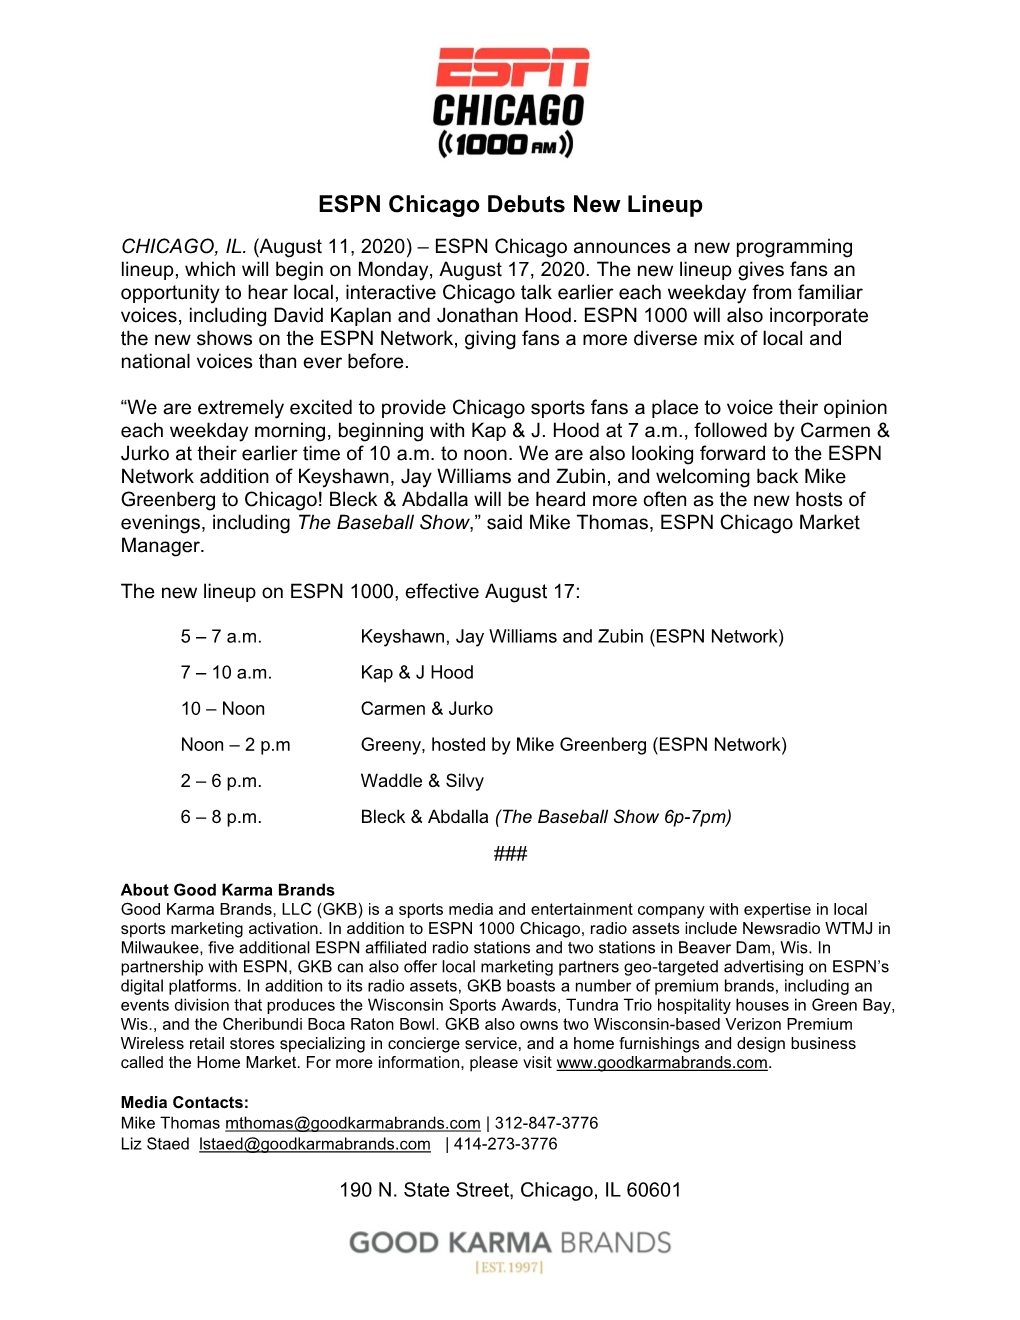 ESPN Chicago Debuts New Lineup